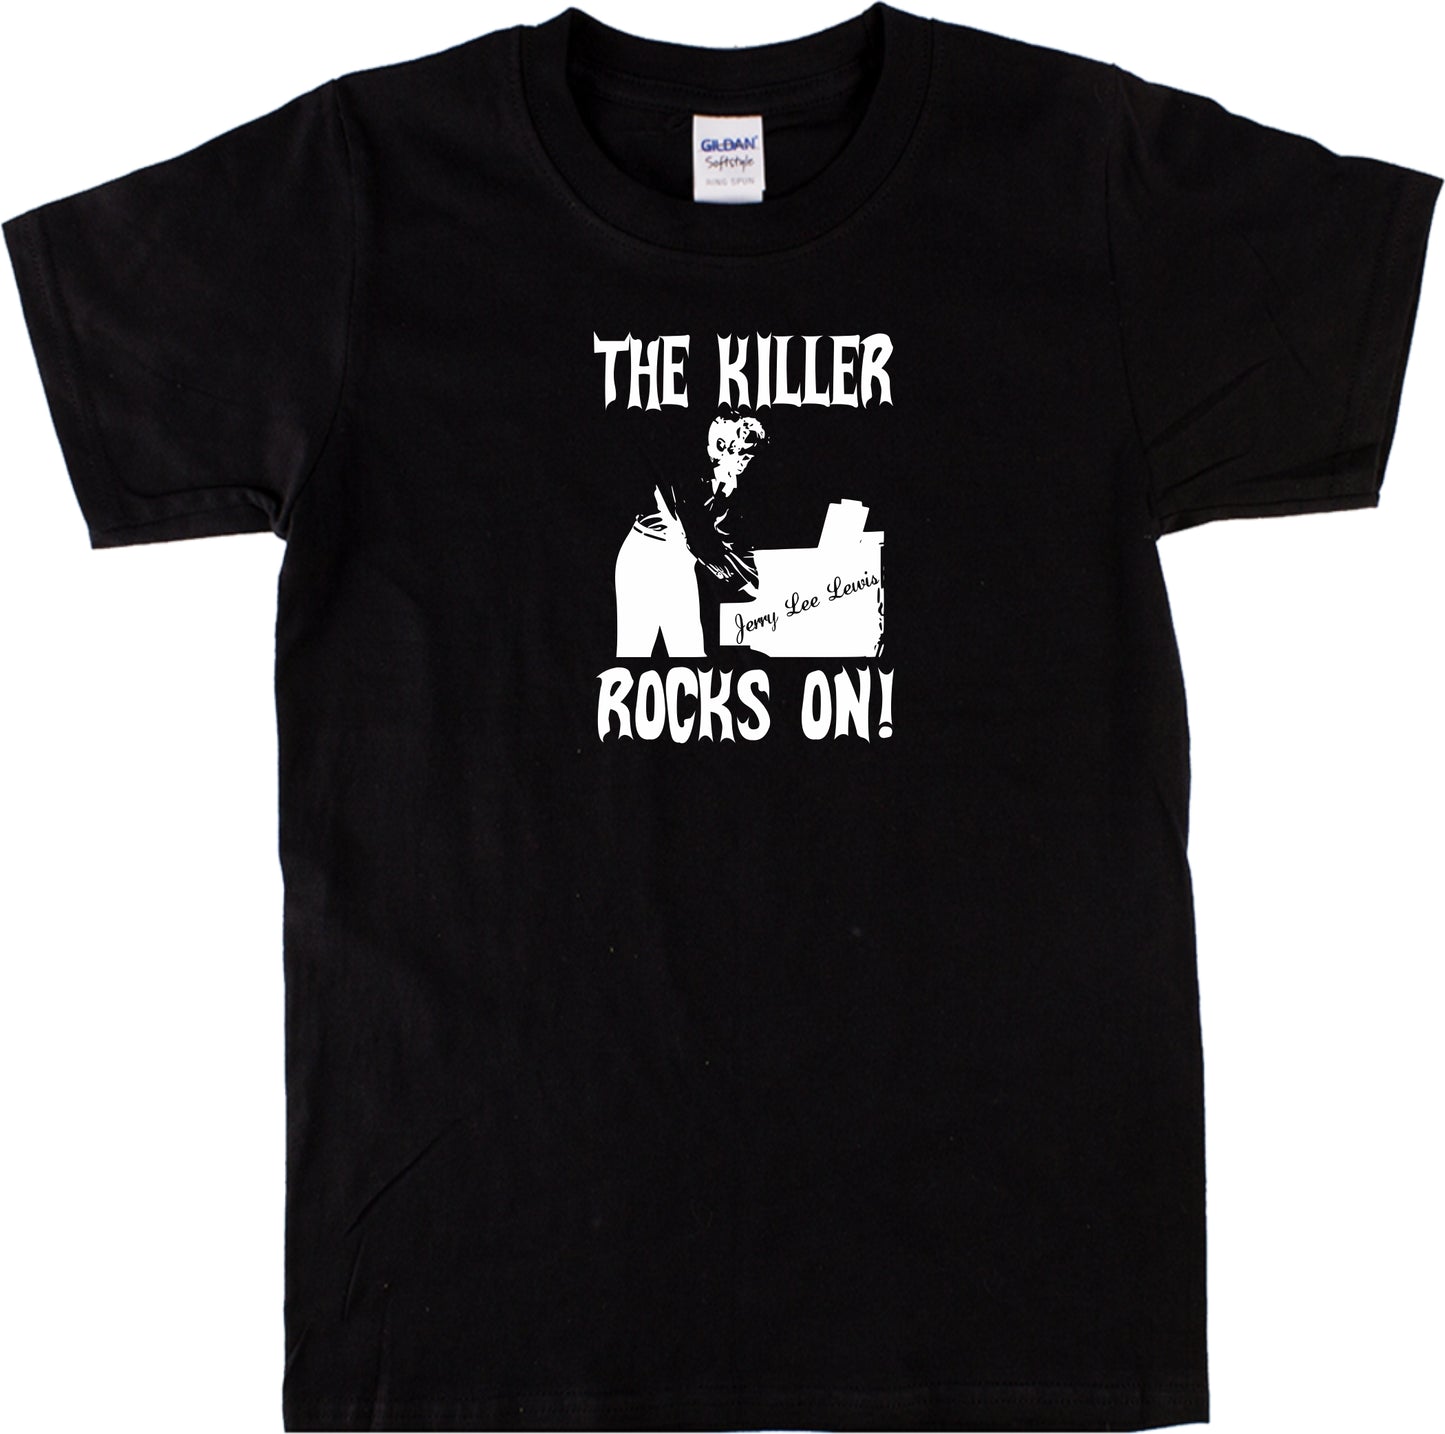 Jerry Lee Lewis "The Killer Rocks On!" T-Shirt - Rock'n'Roll, 1950s Various Colours